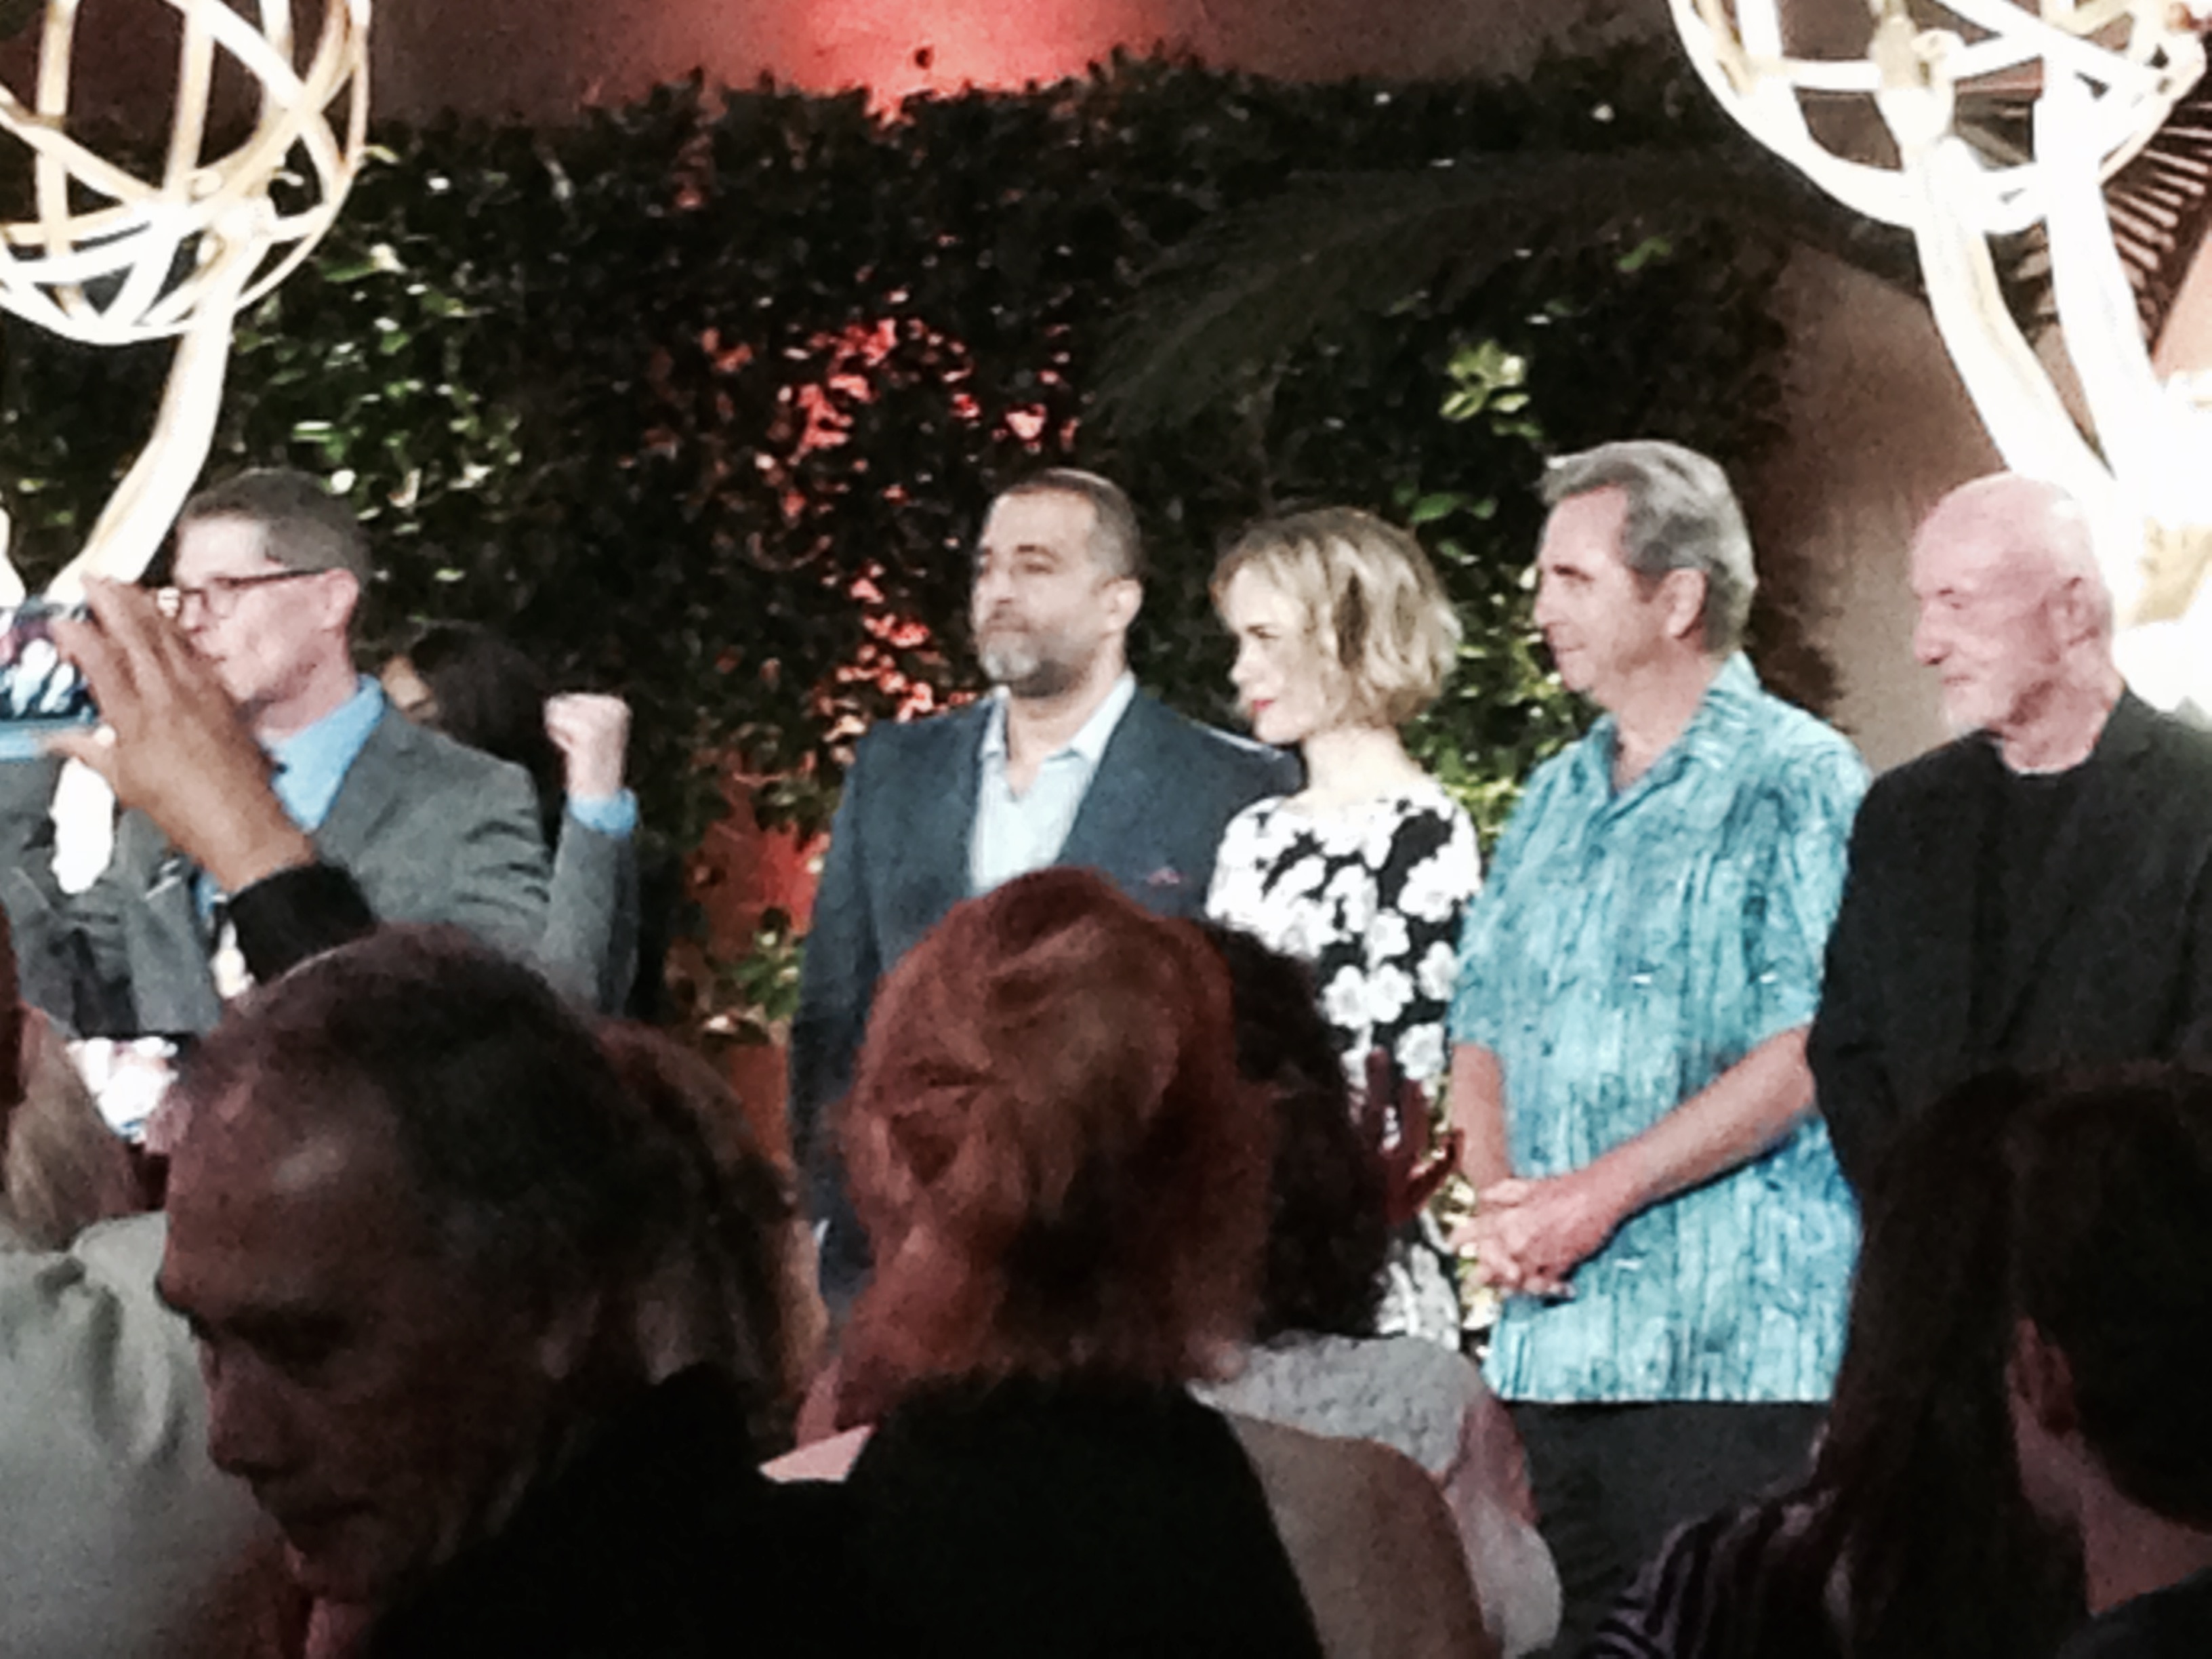 Montage, Beverly Hills 90210, for the Performers Peer Group 2015 + 67th Emmy Celebration.